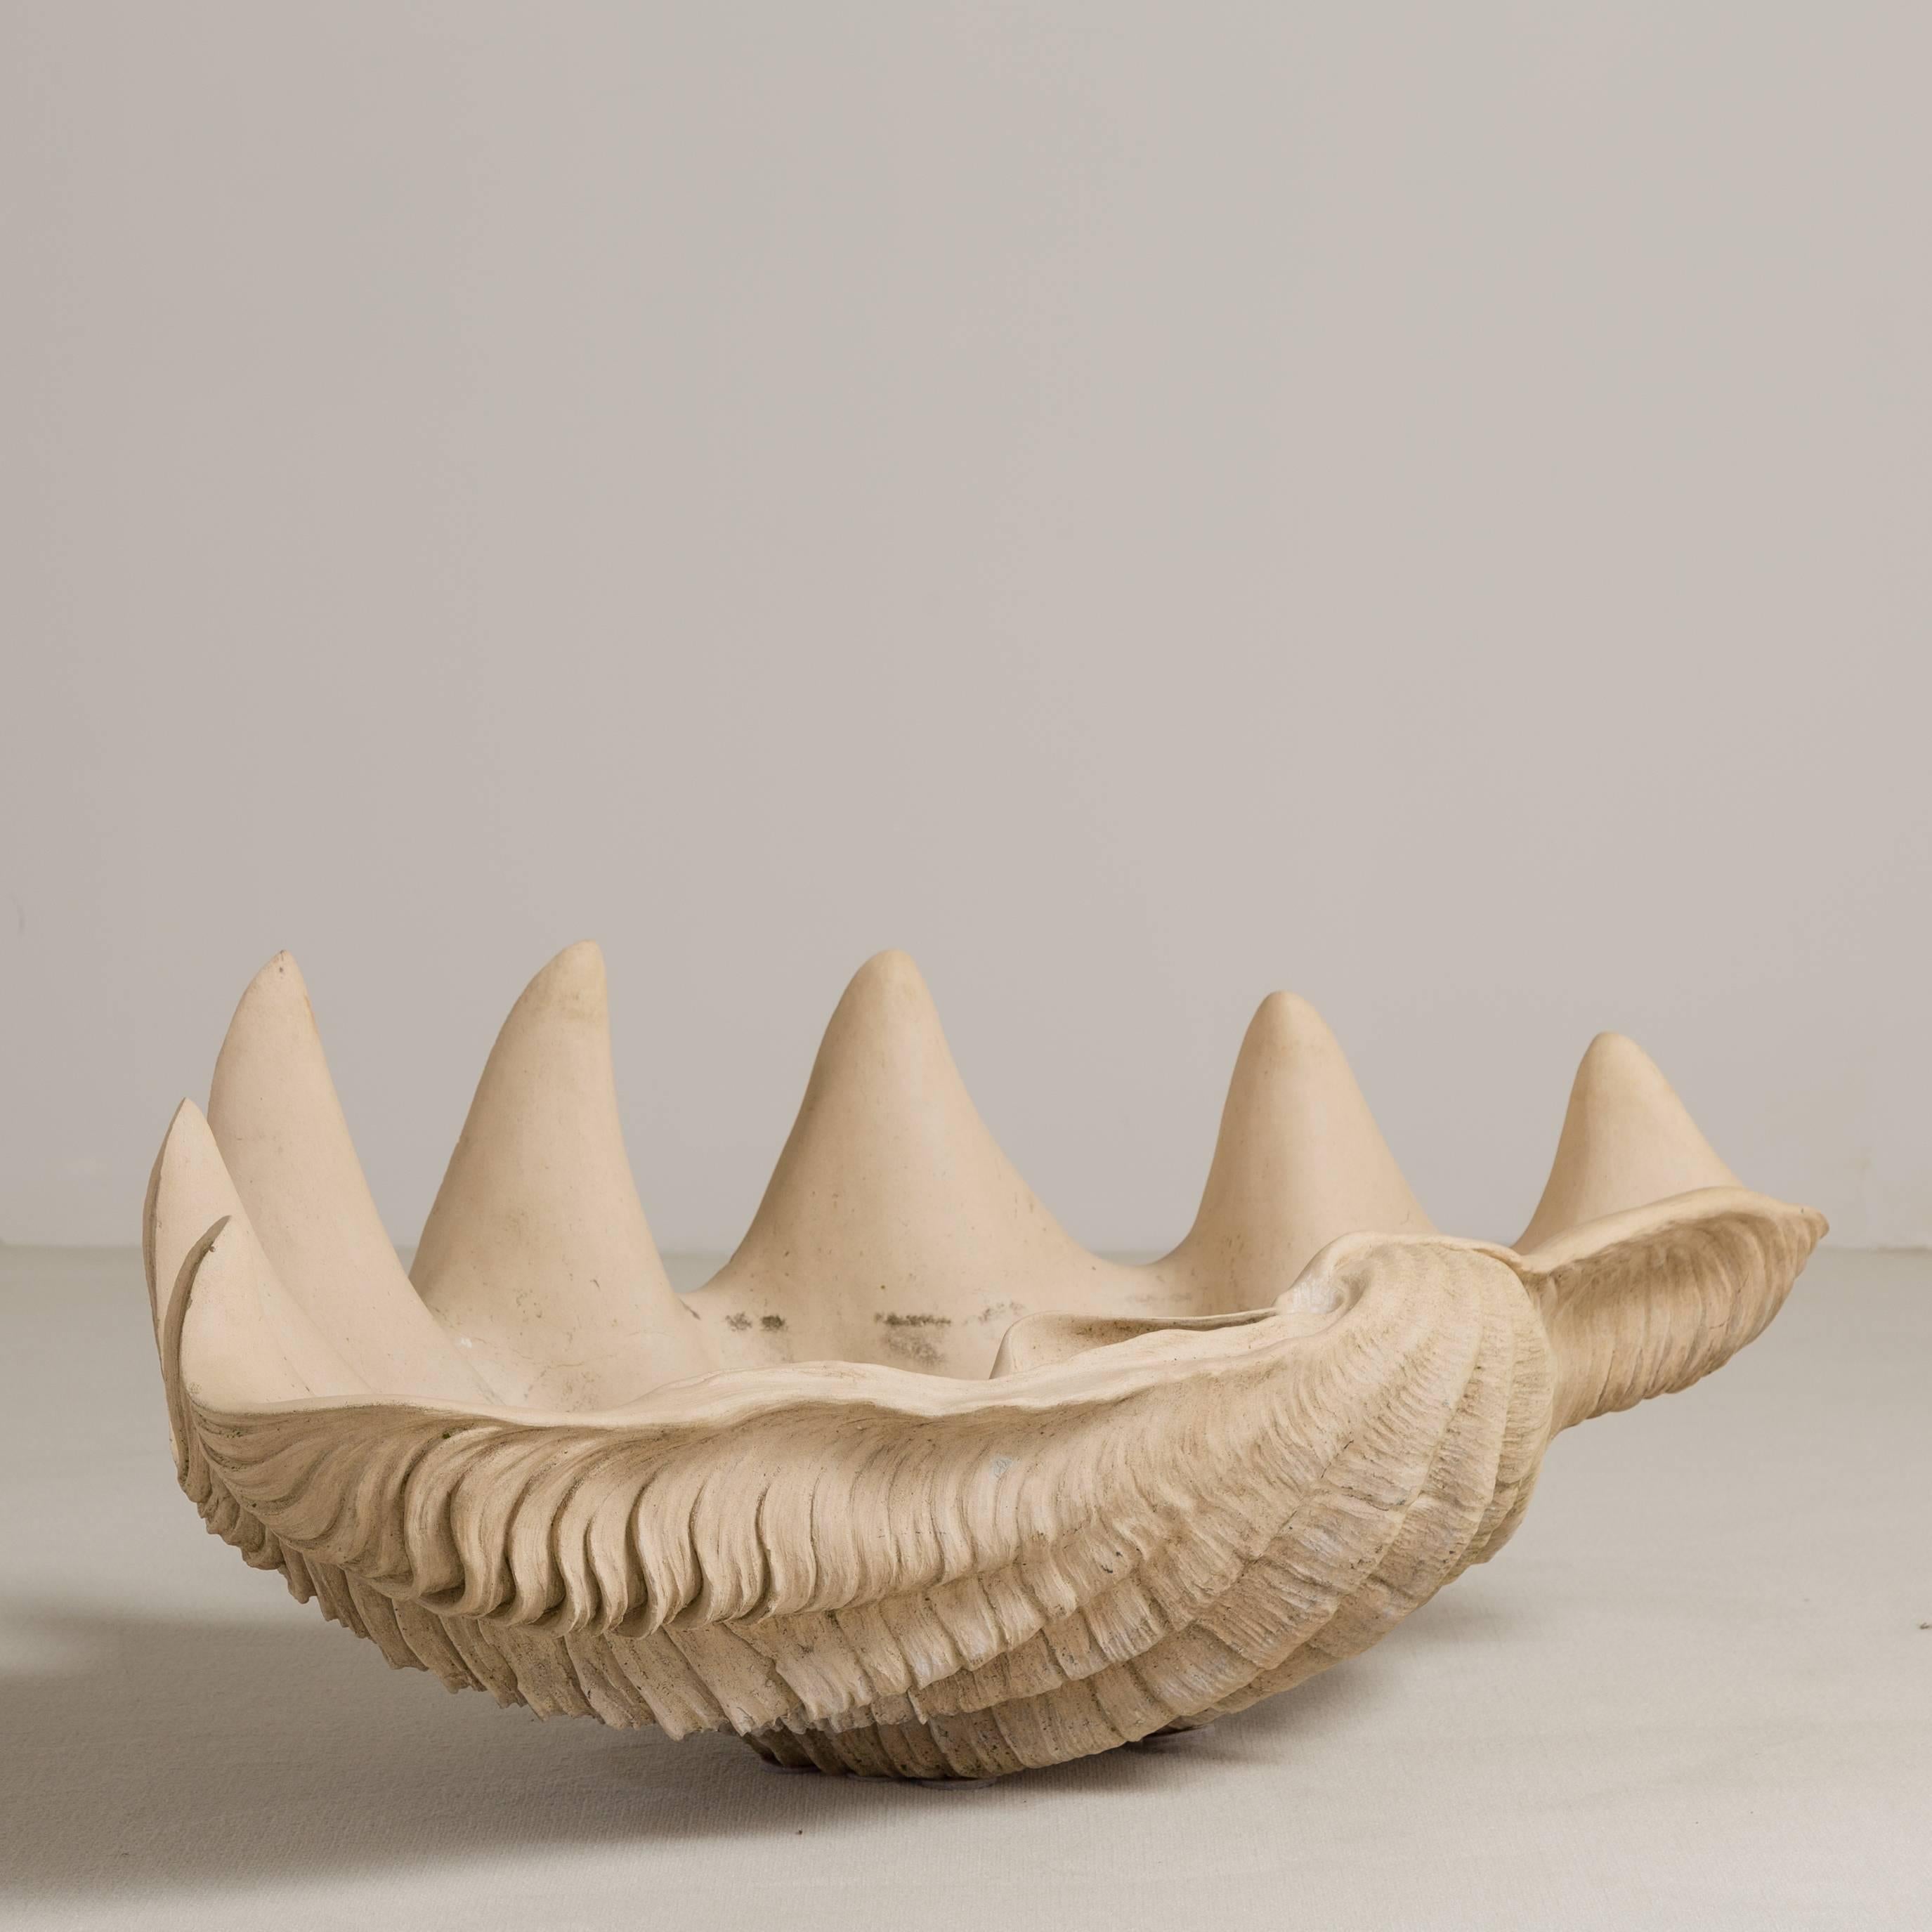 A large contemporary stoneware clam shell bowl by Philip Thomason of Cudworth.

Prices include 20% VAT which is removed for items shipped outside the EU.